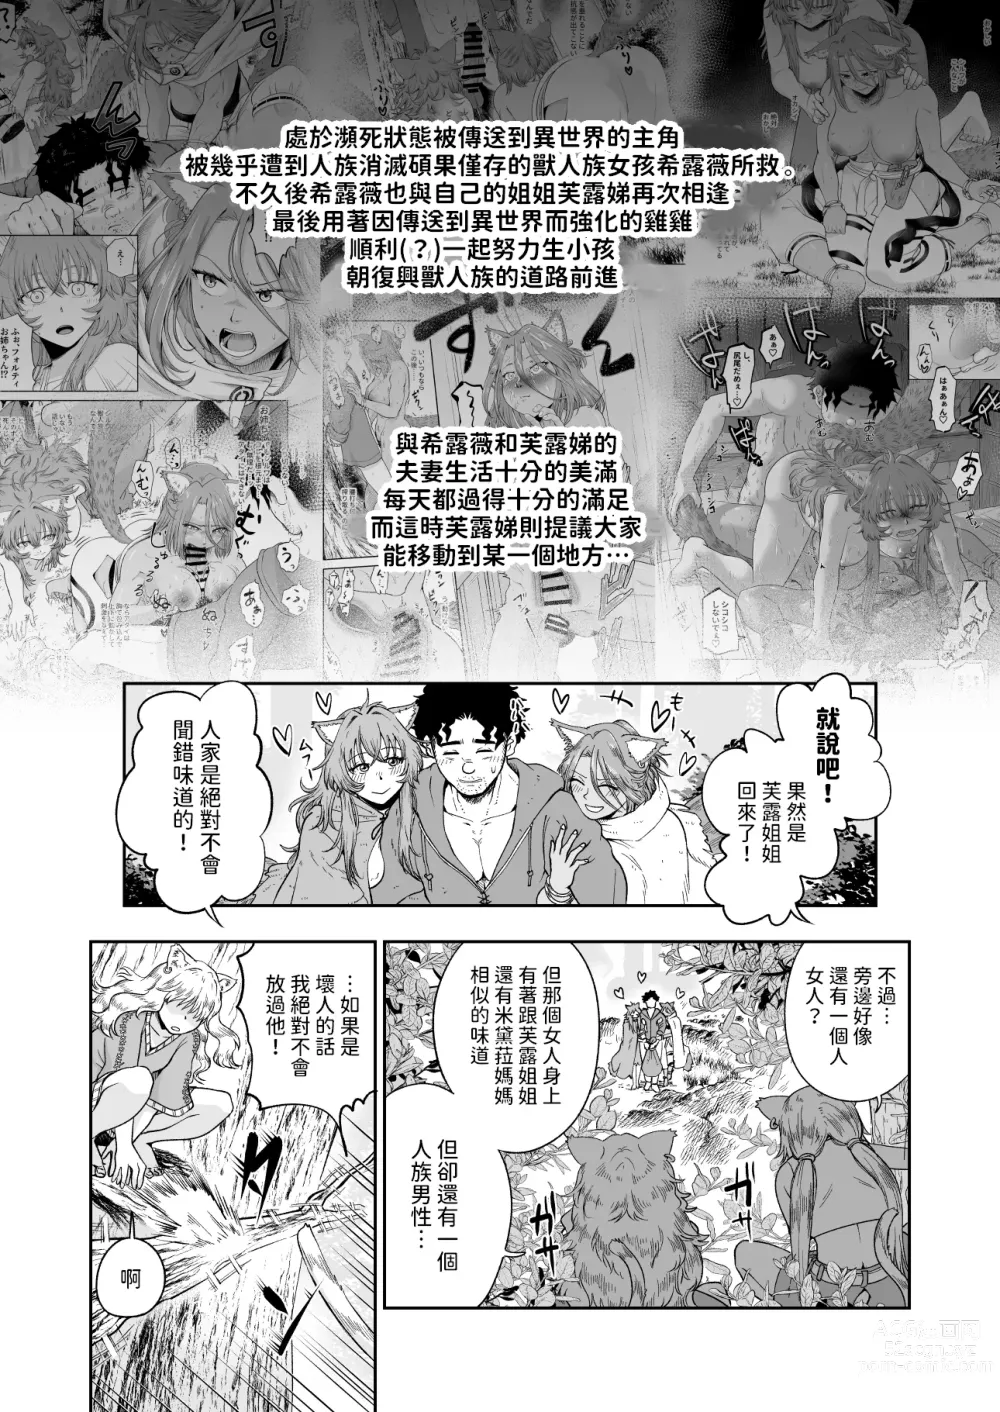 Page 3 of doujinshi ケモ耳娘とゼロから性活 3  中文翻譯